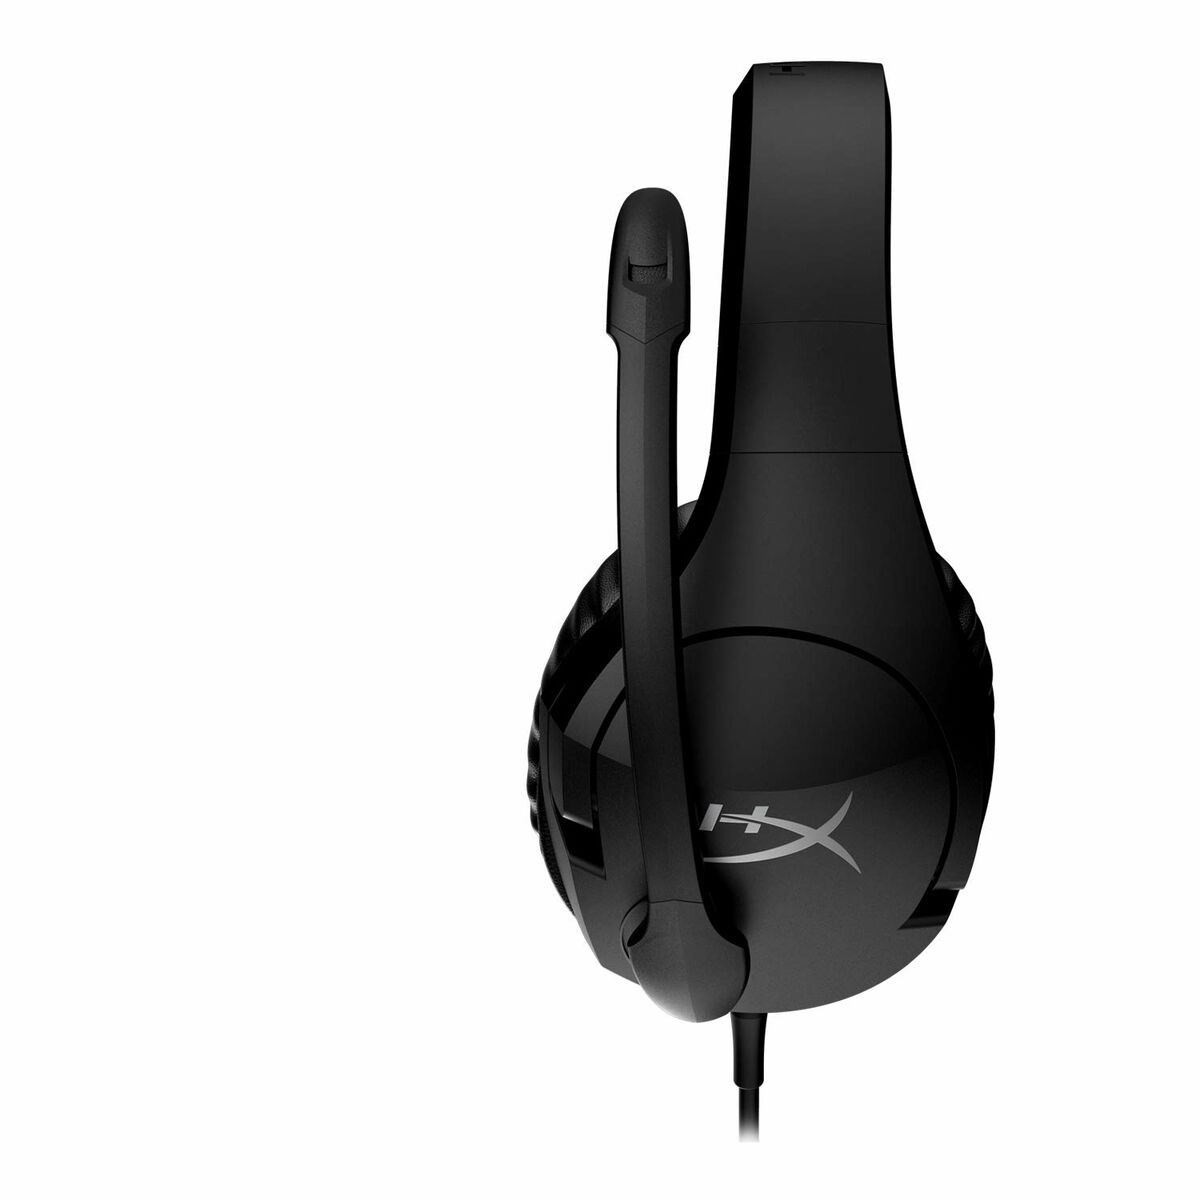 HYPERX CLOUD STINGER S 7.1 GAMING HEADSET FOR PC